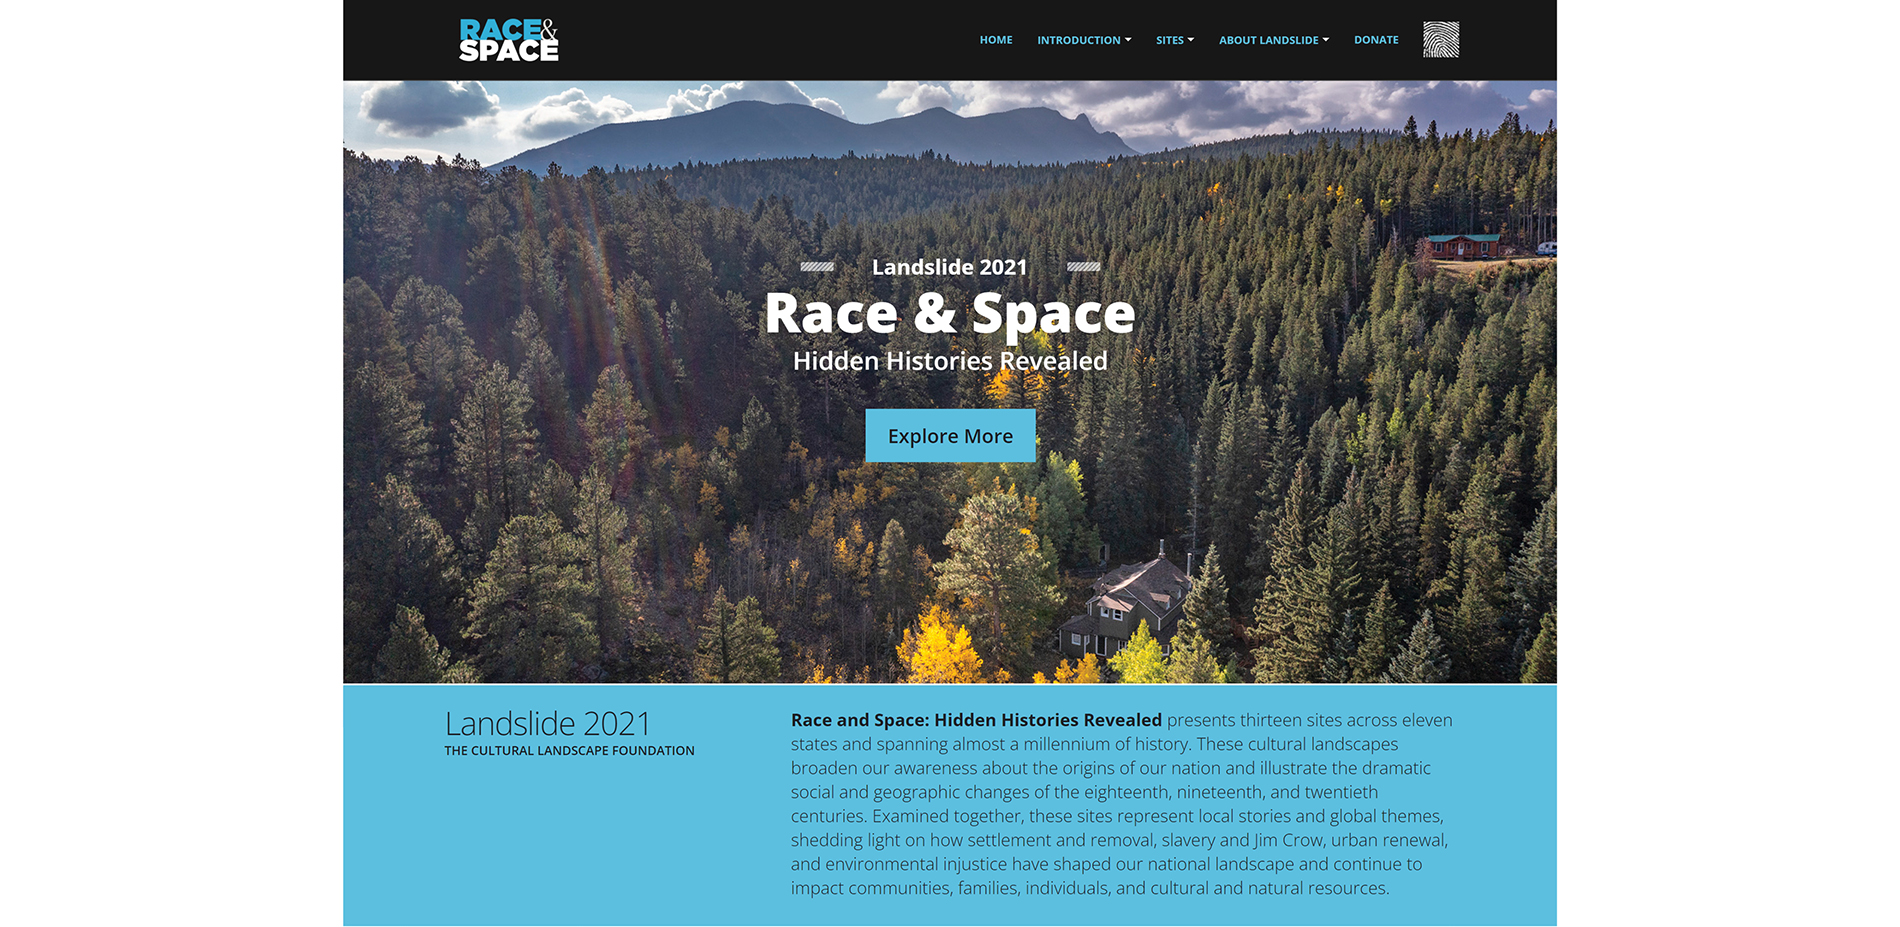 “Landslide: Race and Space – Page 1 – website landing page”